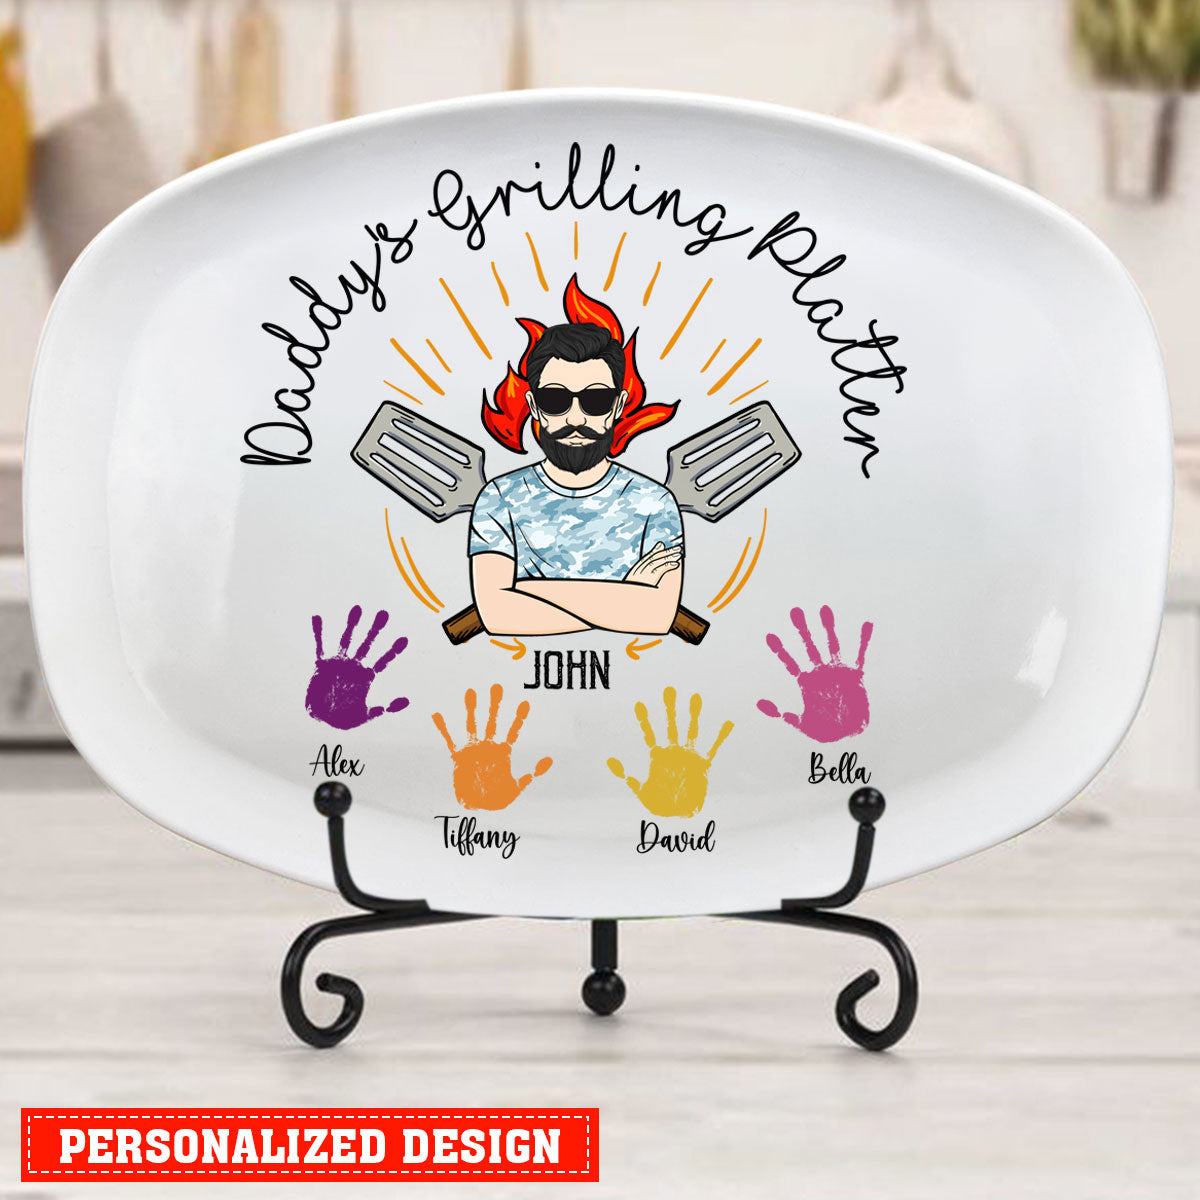 Personalized Grilling Platter, Daddy's Grilling Plate, BBQ Gifts